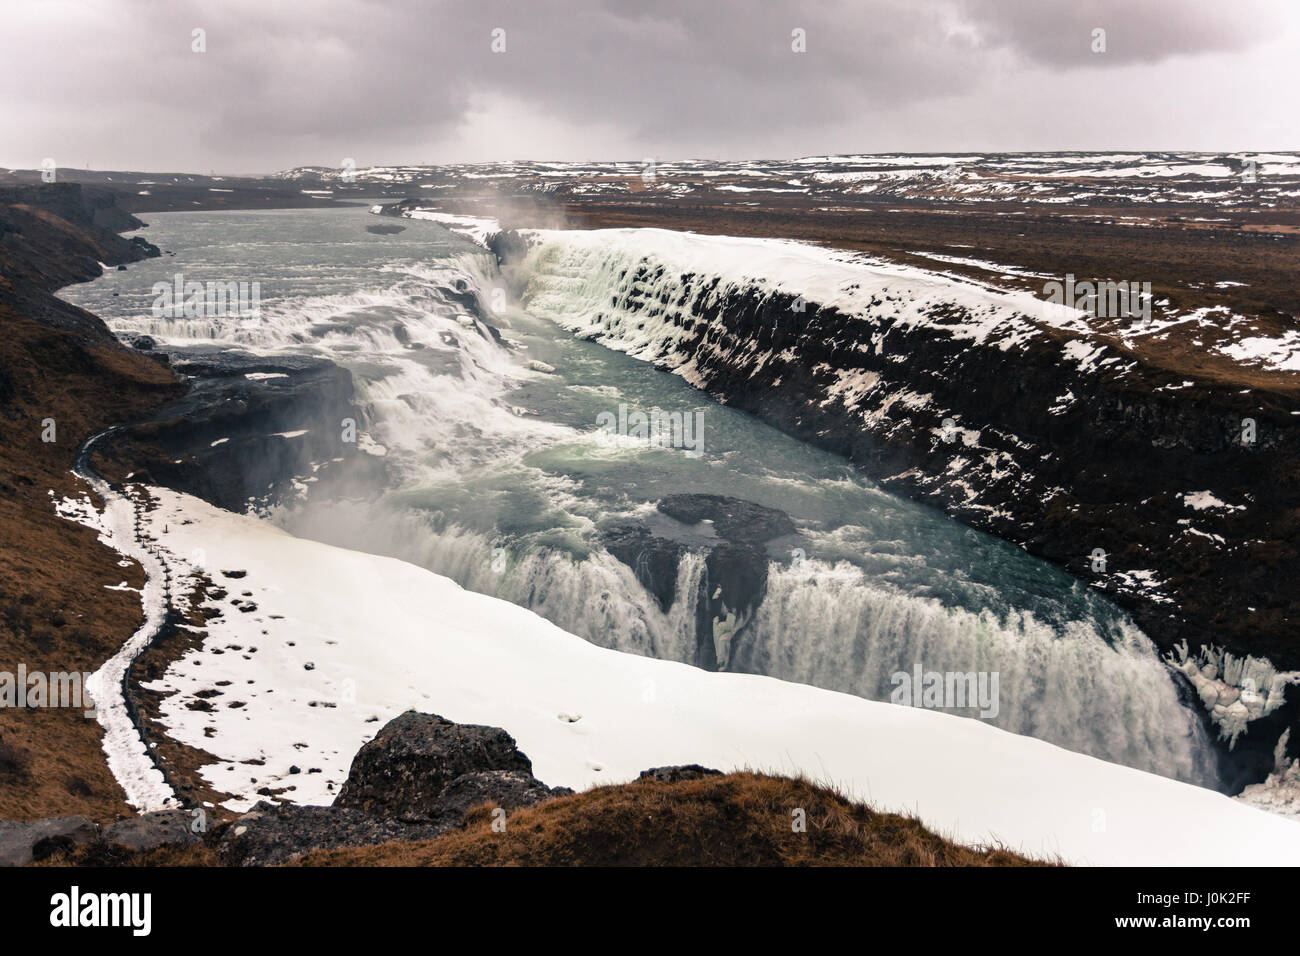 The iconic Gullfoss waterfall, part of the Golden Circle and one of the most popular natural wonders in western Iceland Stock Photo